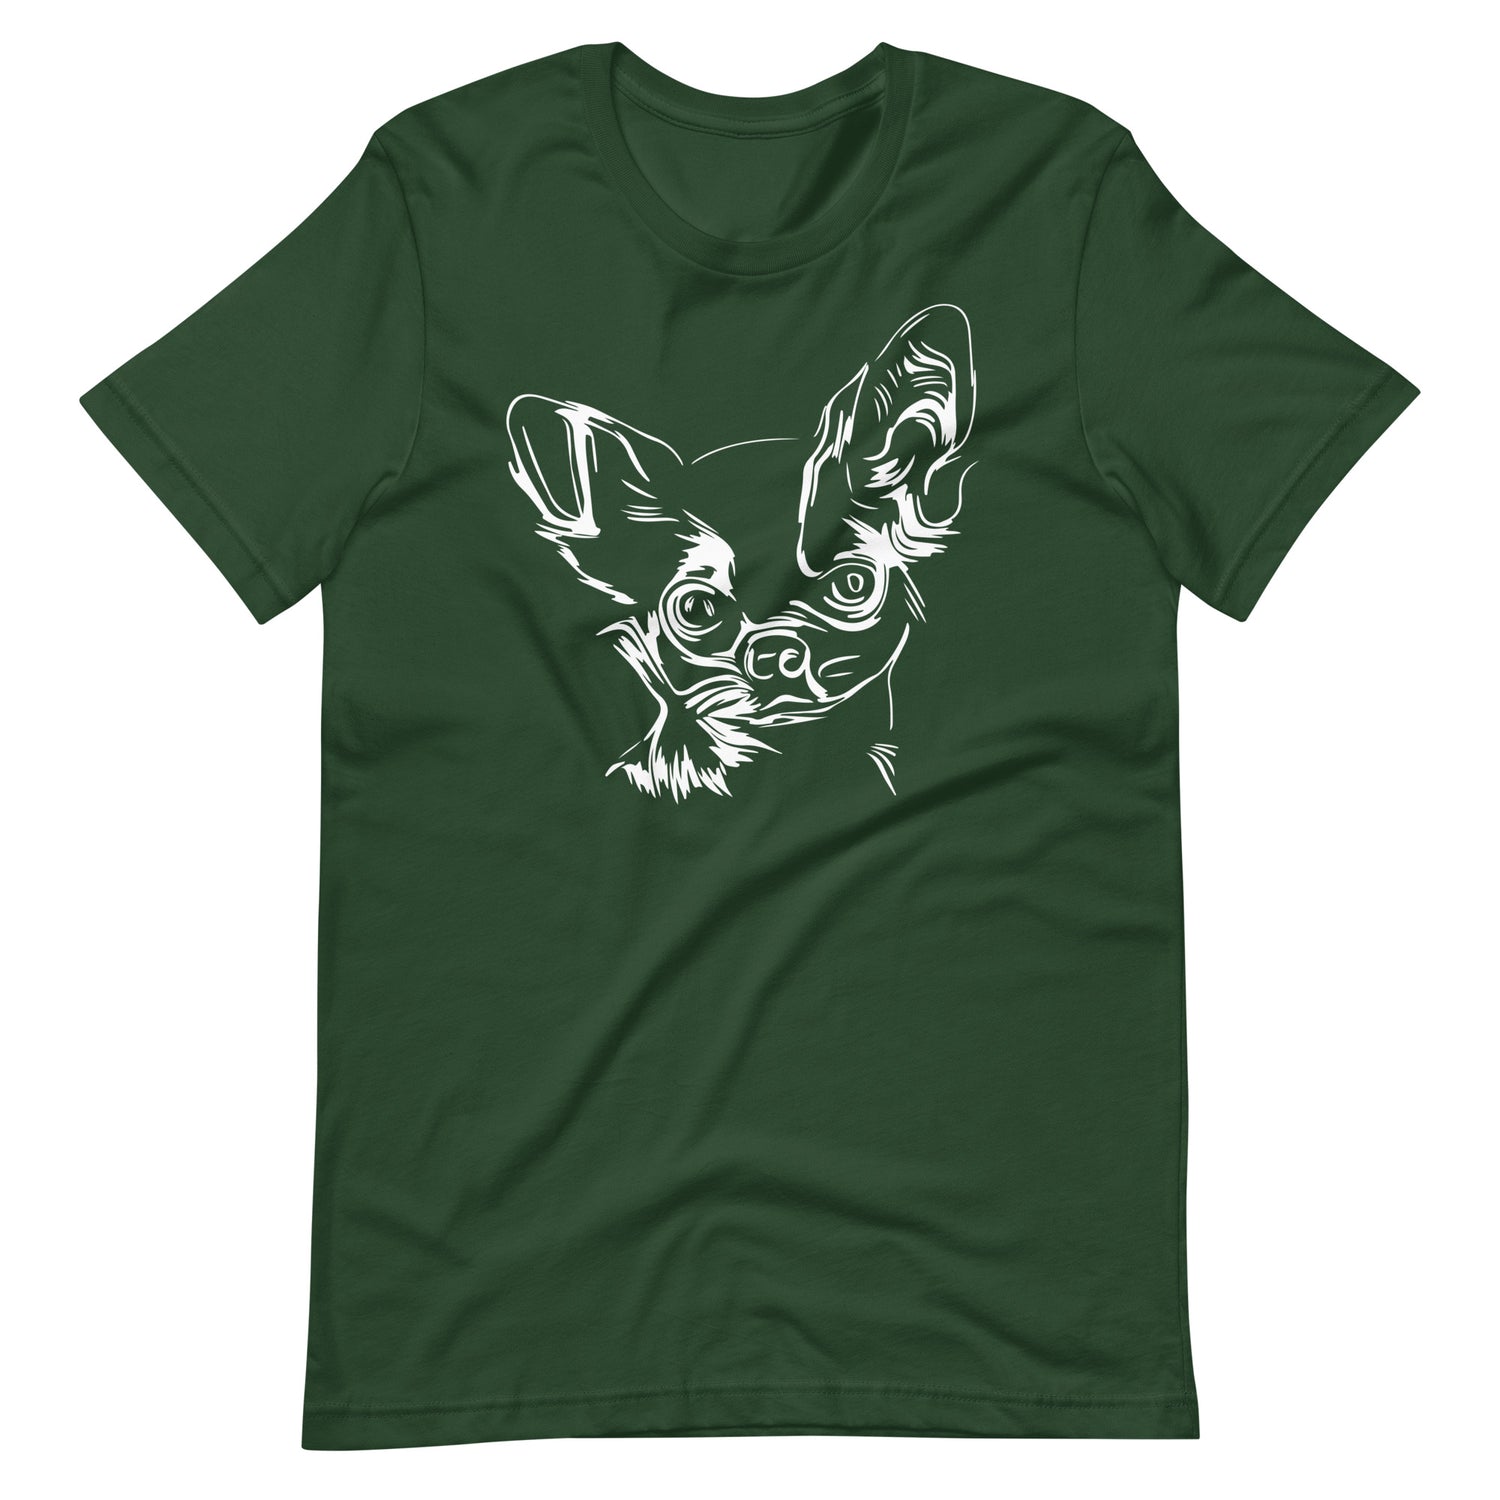 White line Chihuahua face on unisex forest t-shirt